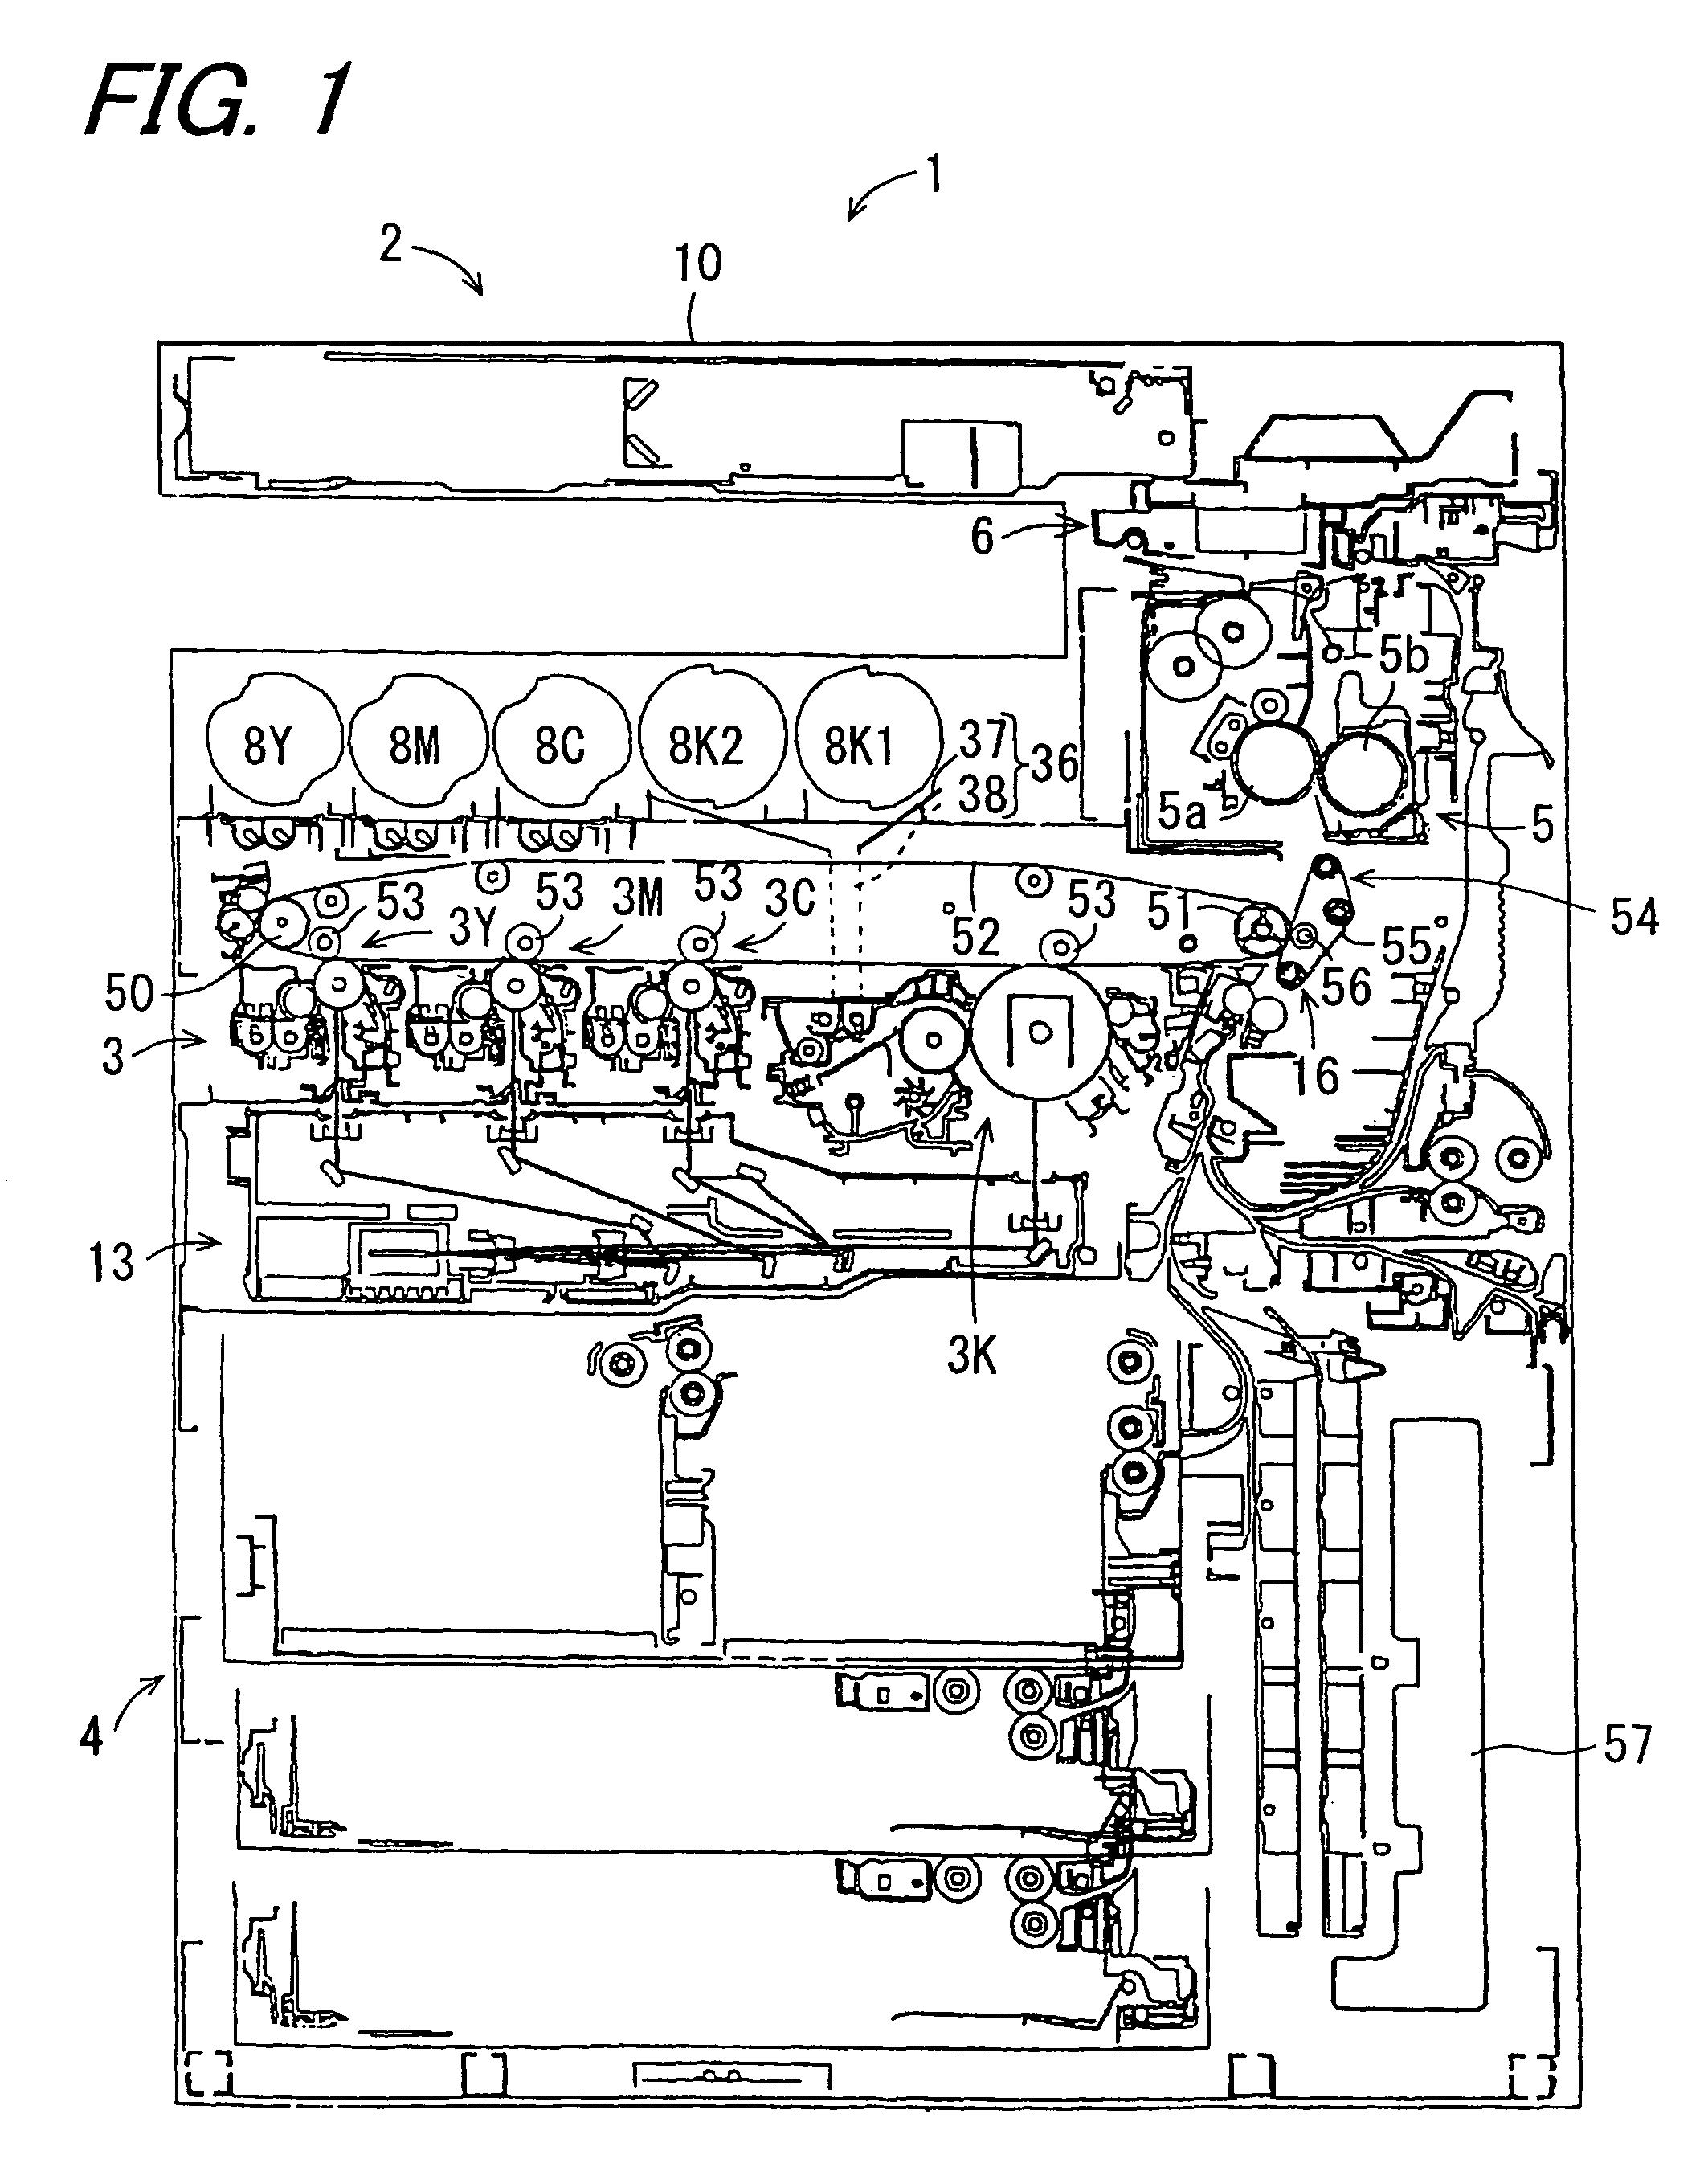 Image forming apparatus for supplying toner from one of a plurality of toner cartridges